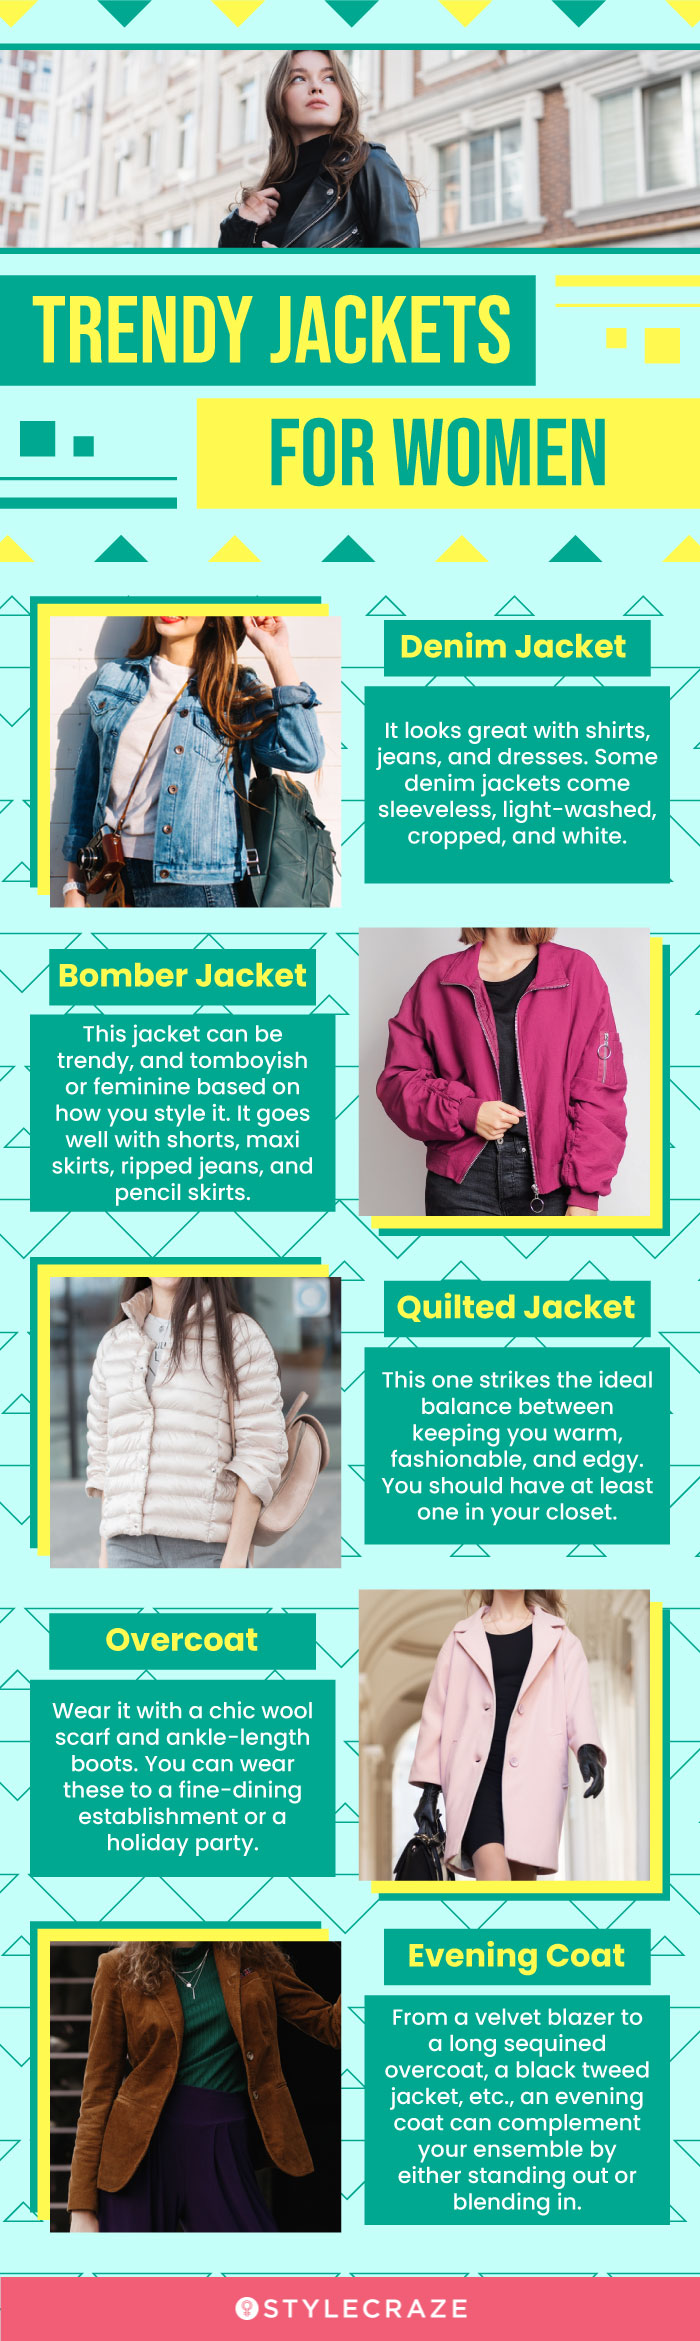 trendy jackets for women (infographic)